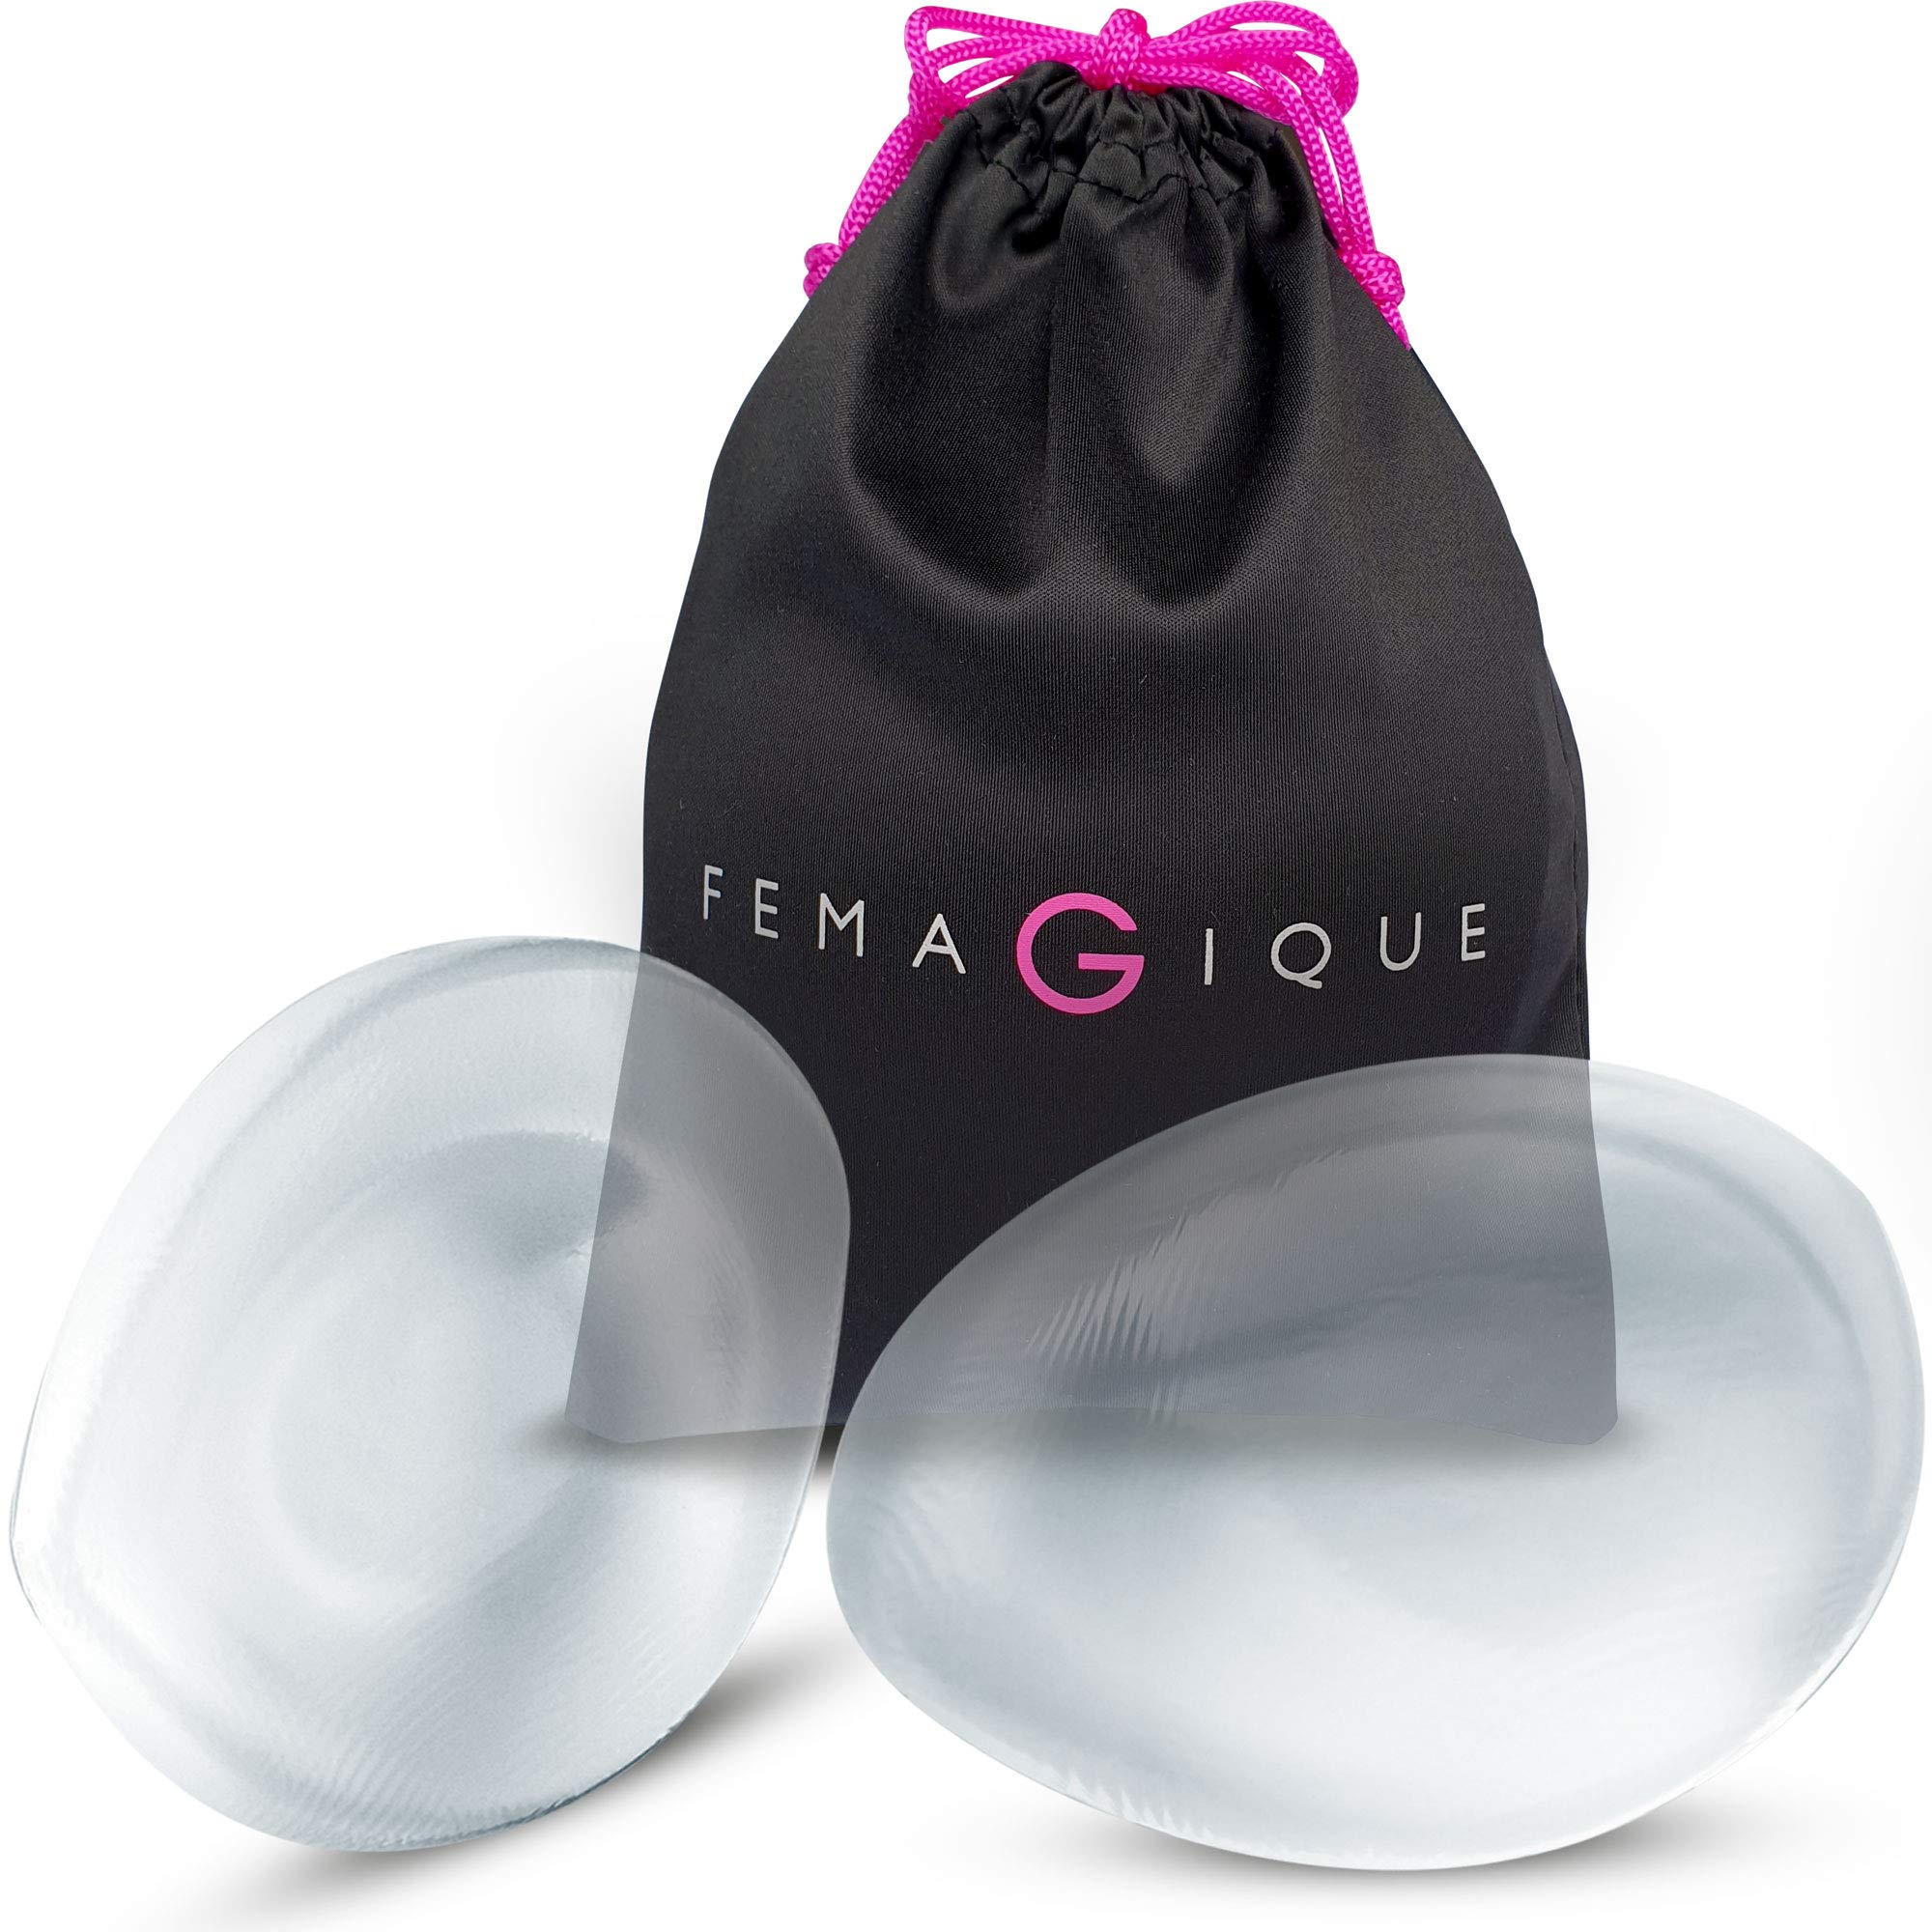 FEMAGIQUE Silicone Bra Inserts – Breast Enhancement Push Up Pads - Cleavage Enhancing Pads - Nonadhesive